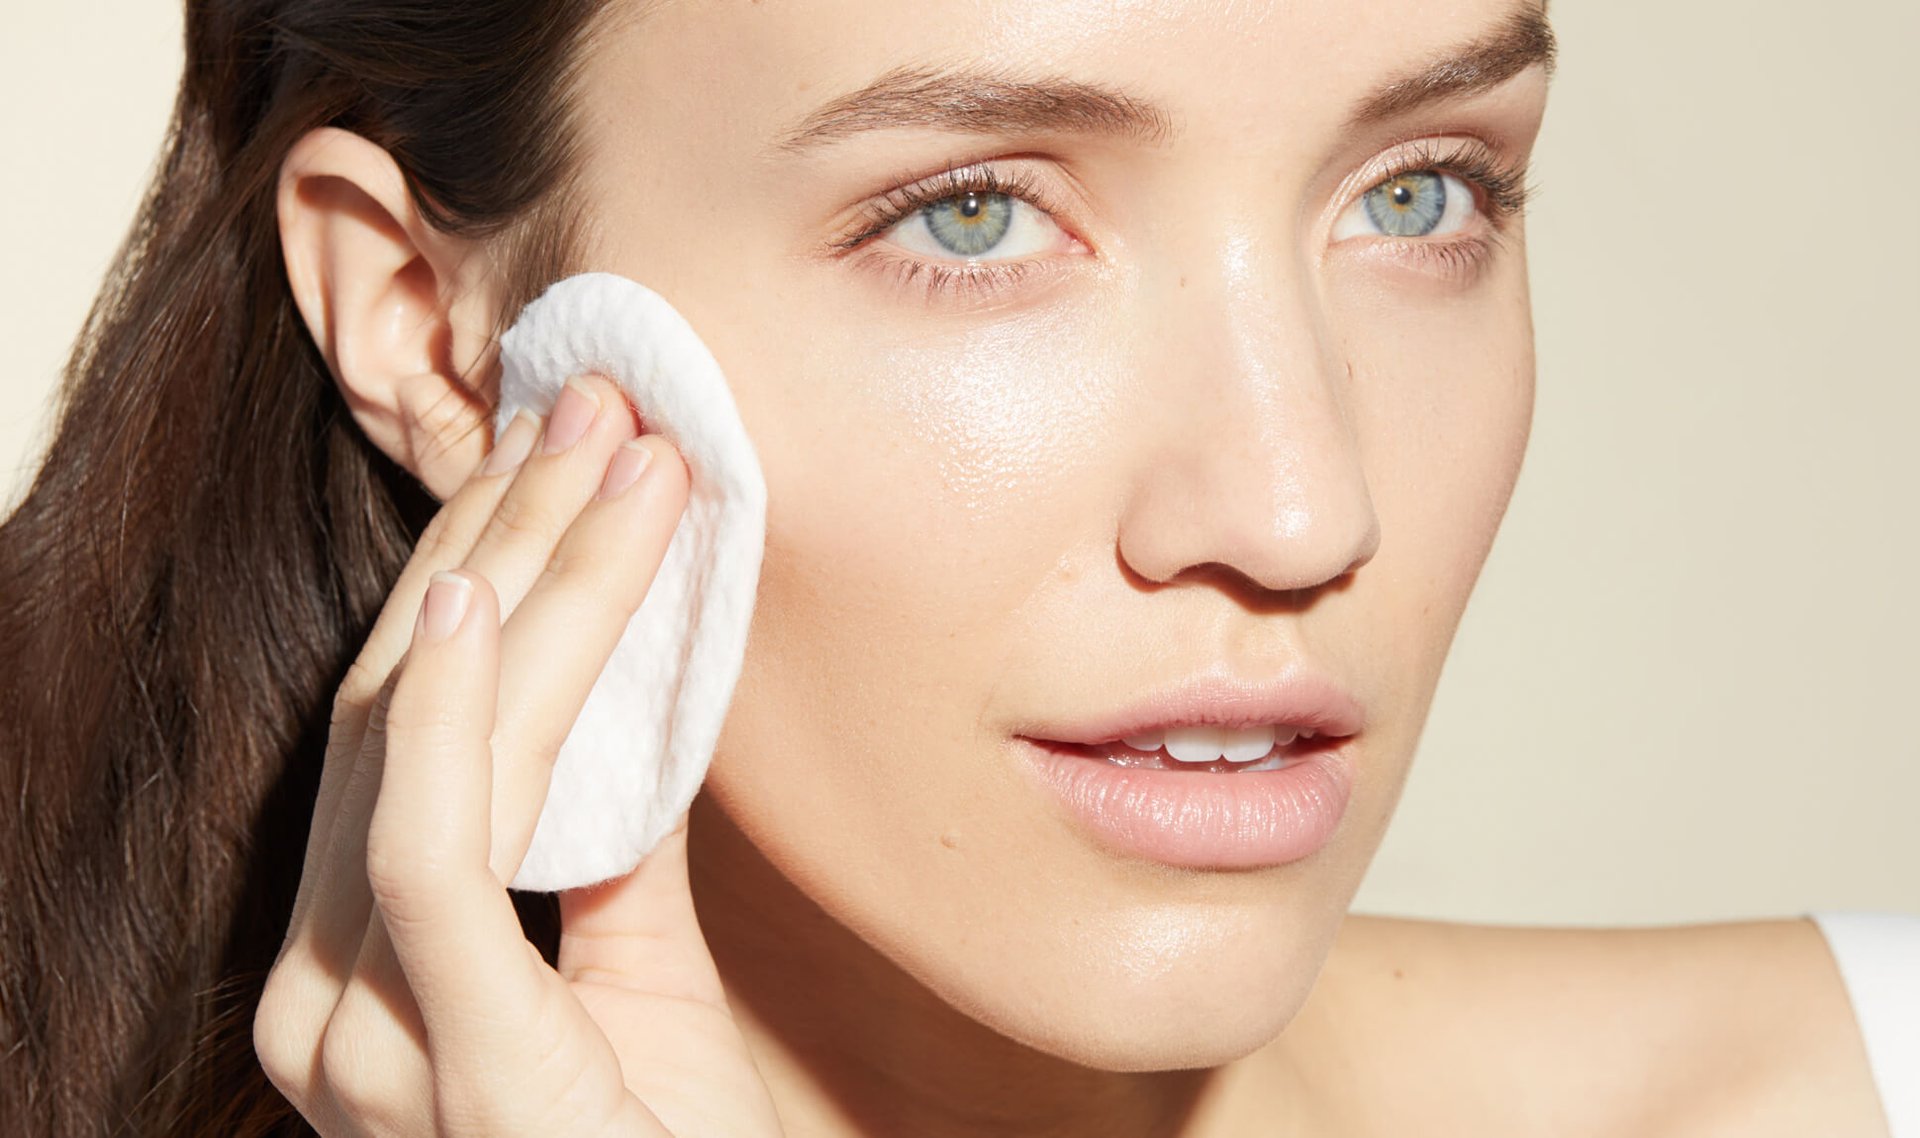 4 Easy Steps to Build a Skincare Routine